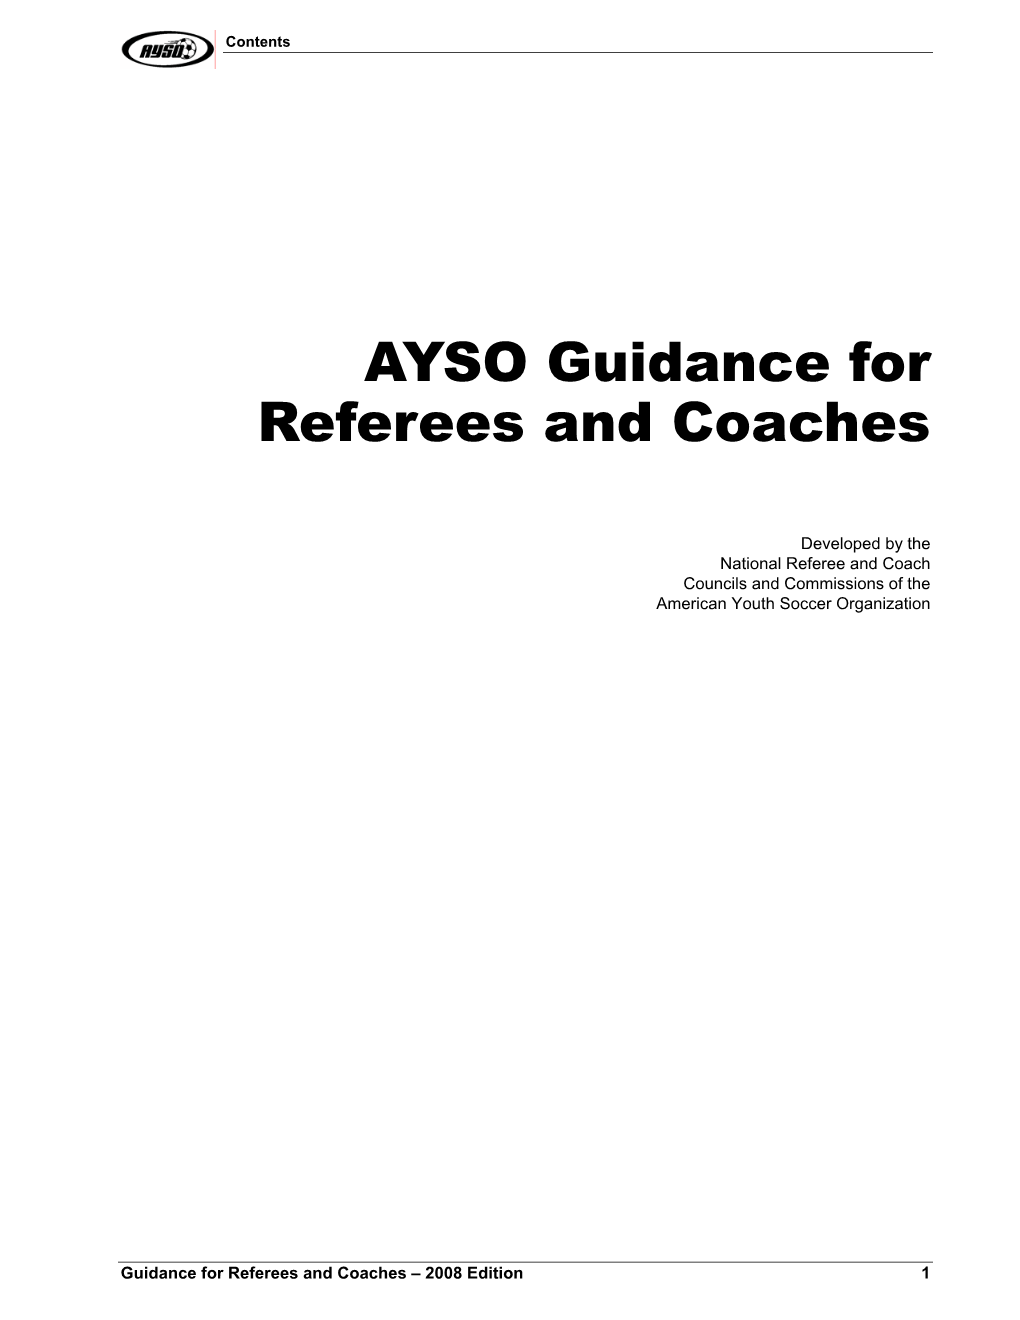 AYSO Guidance for Referees and Coaches